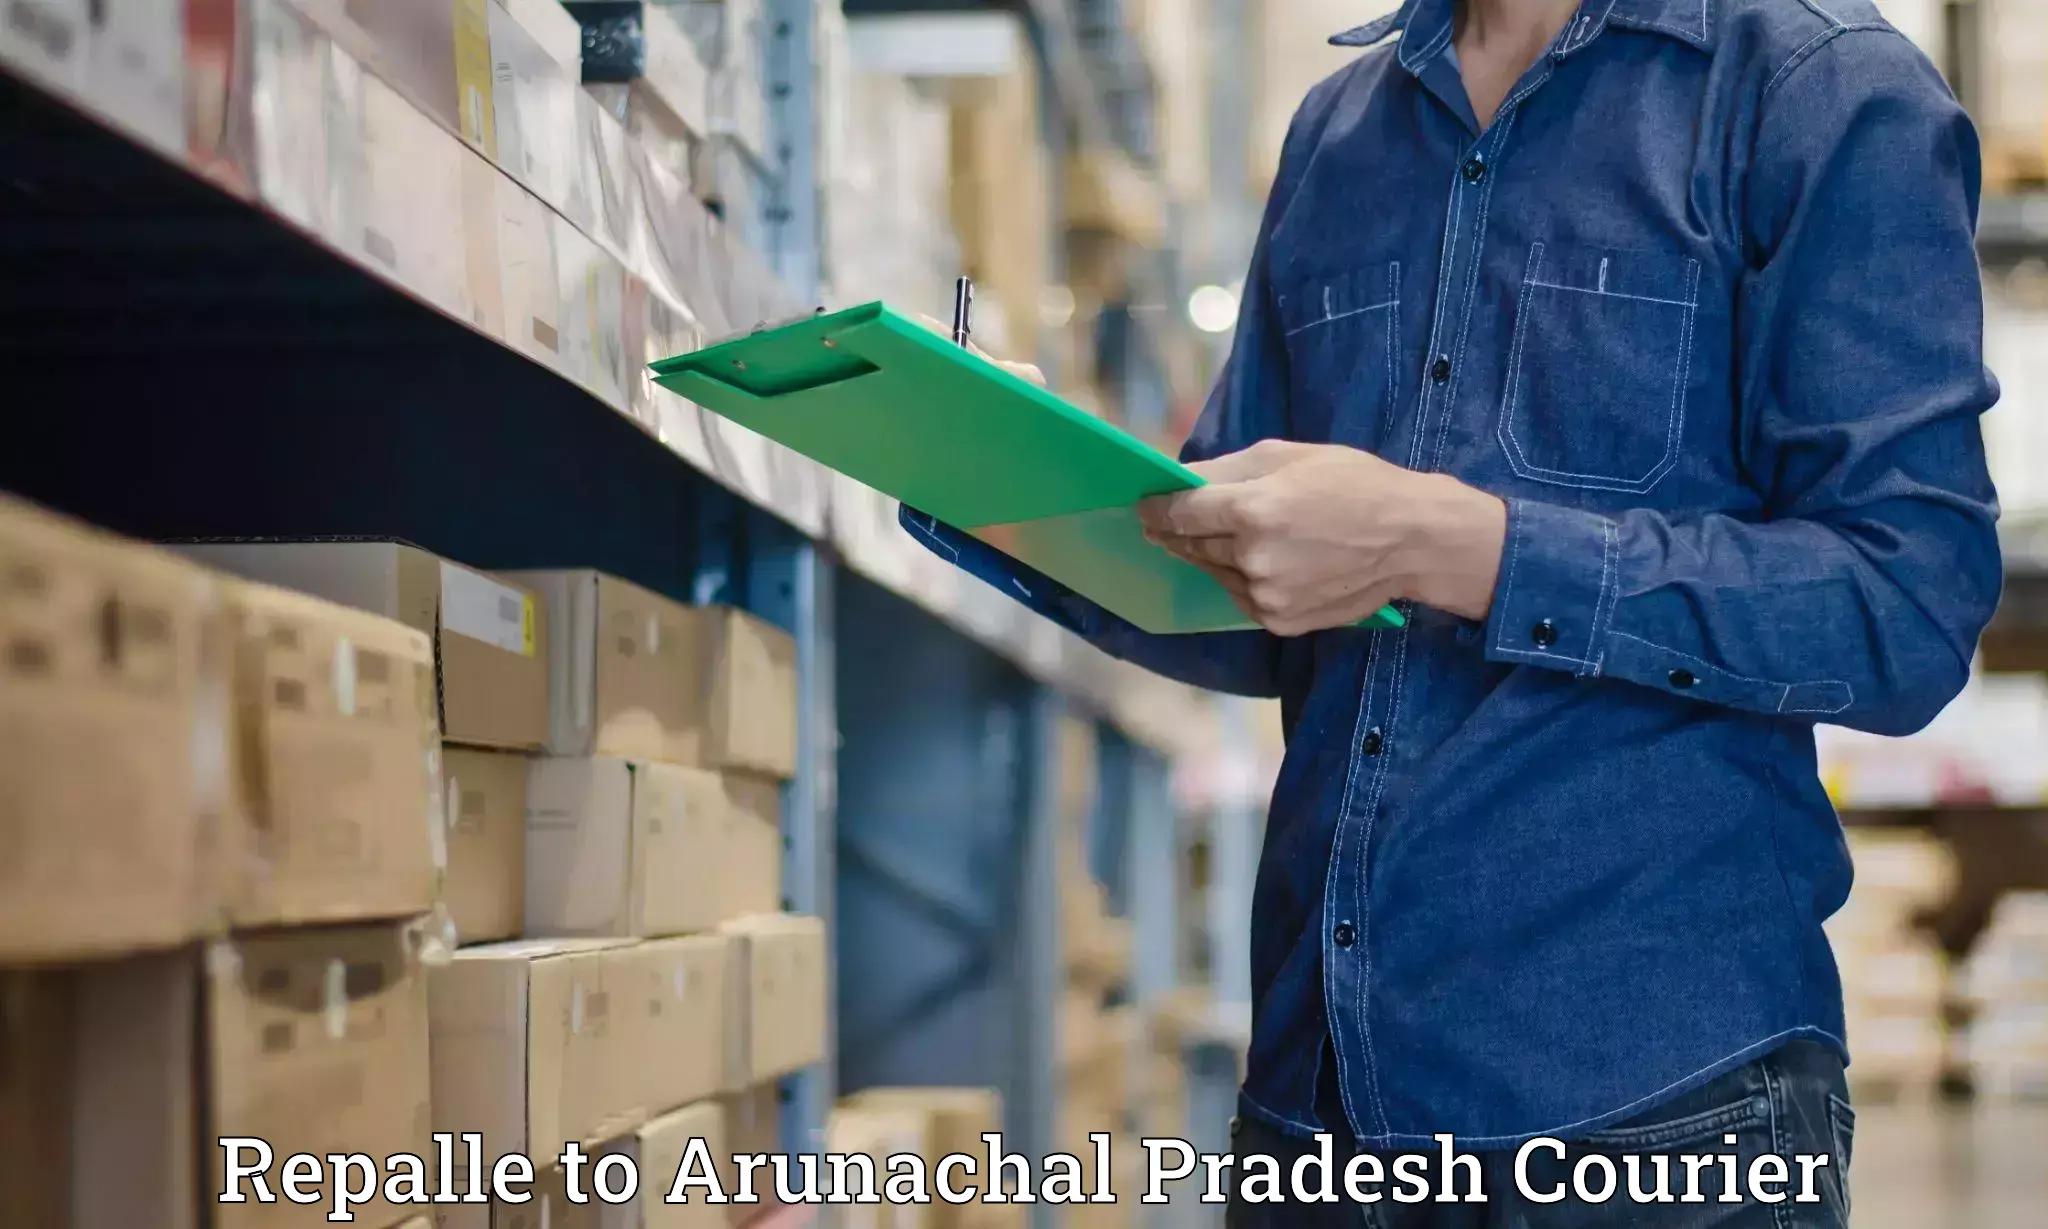 Luggage delivery system Repalle to Arunachal Pradesh